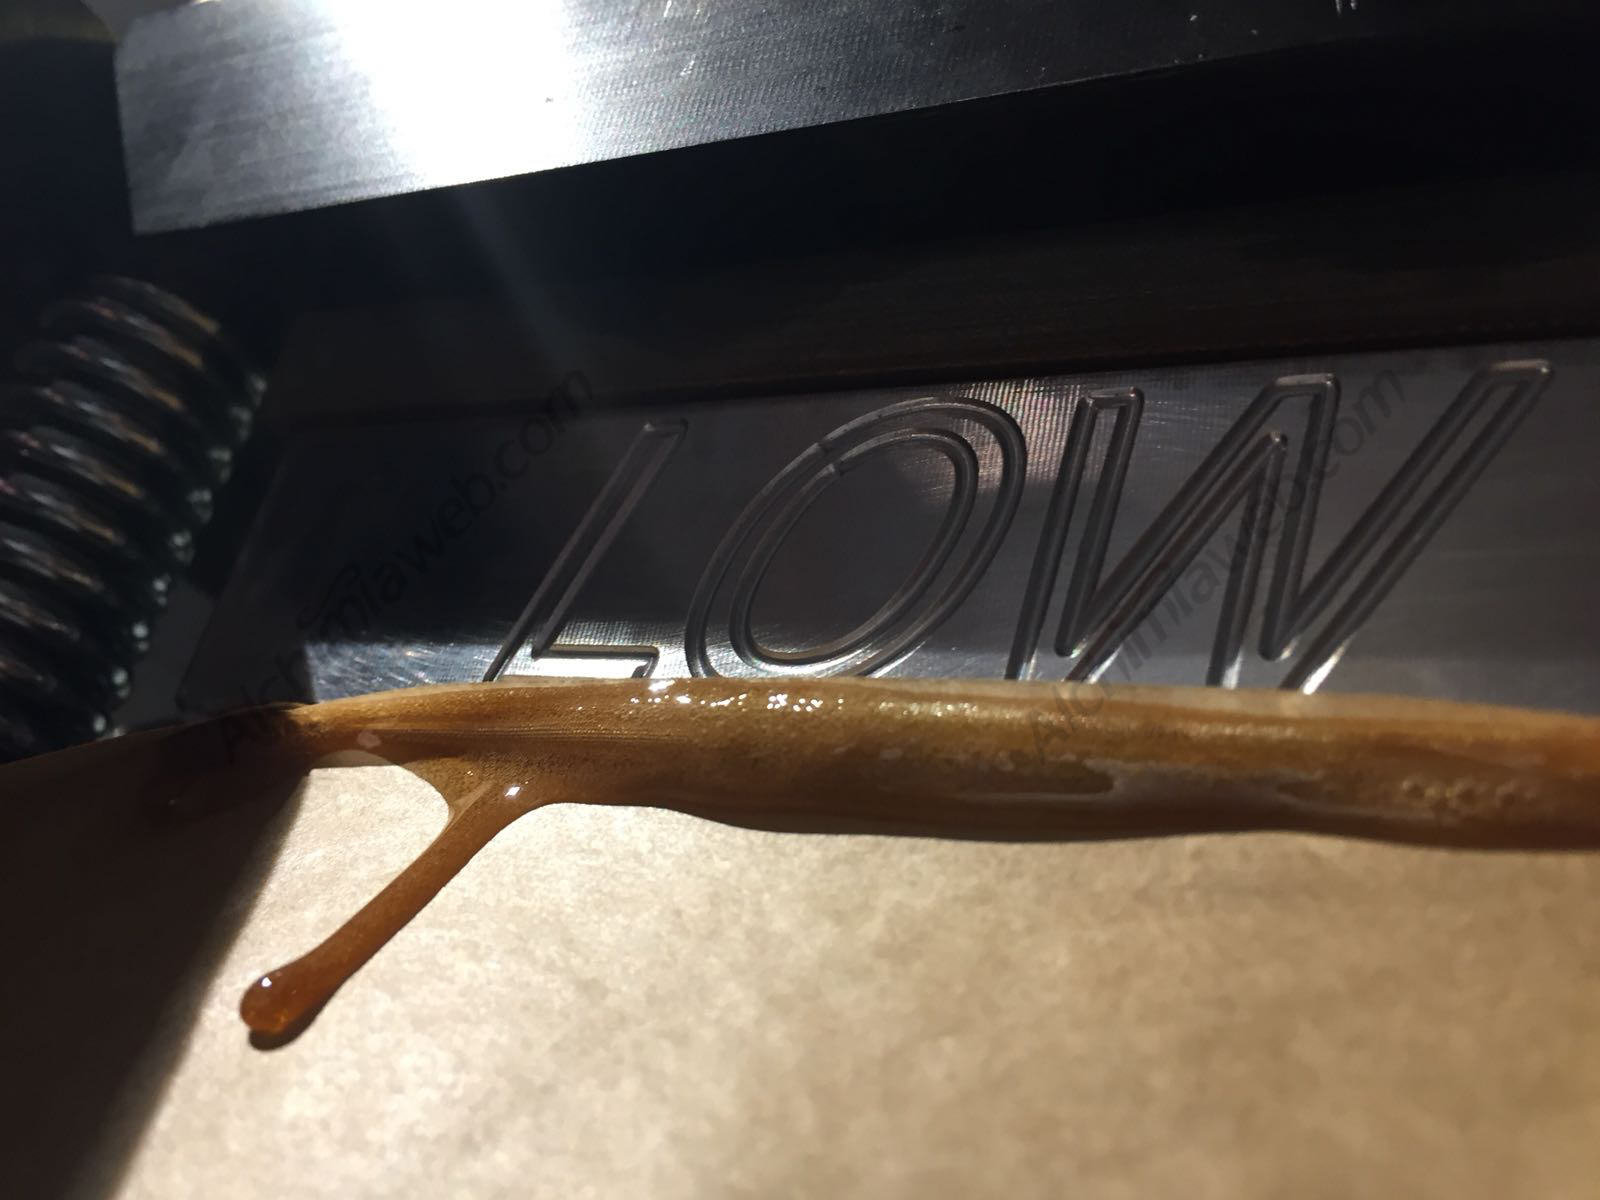 The rosin is beginning to flow